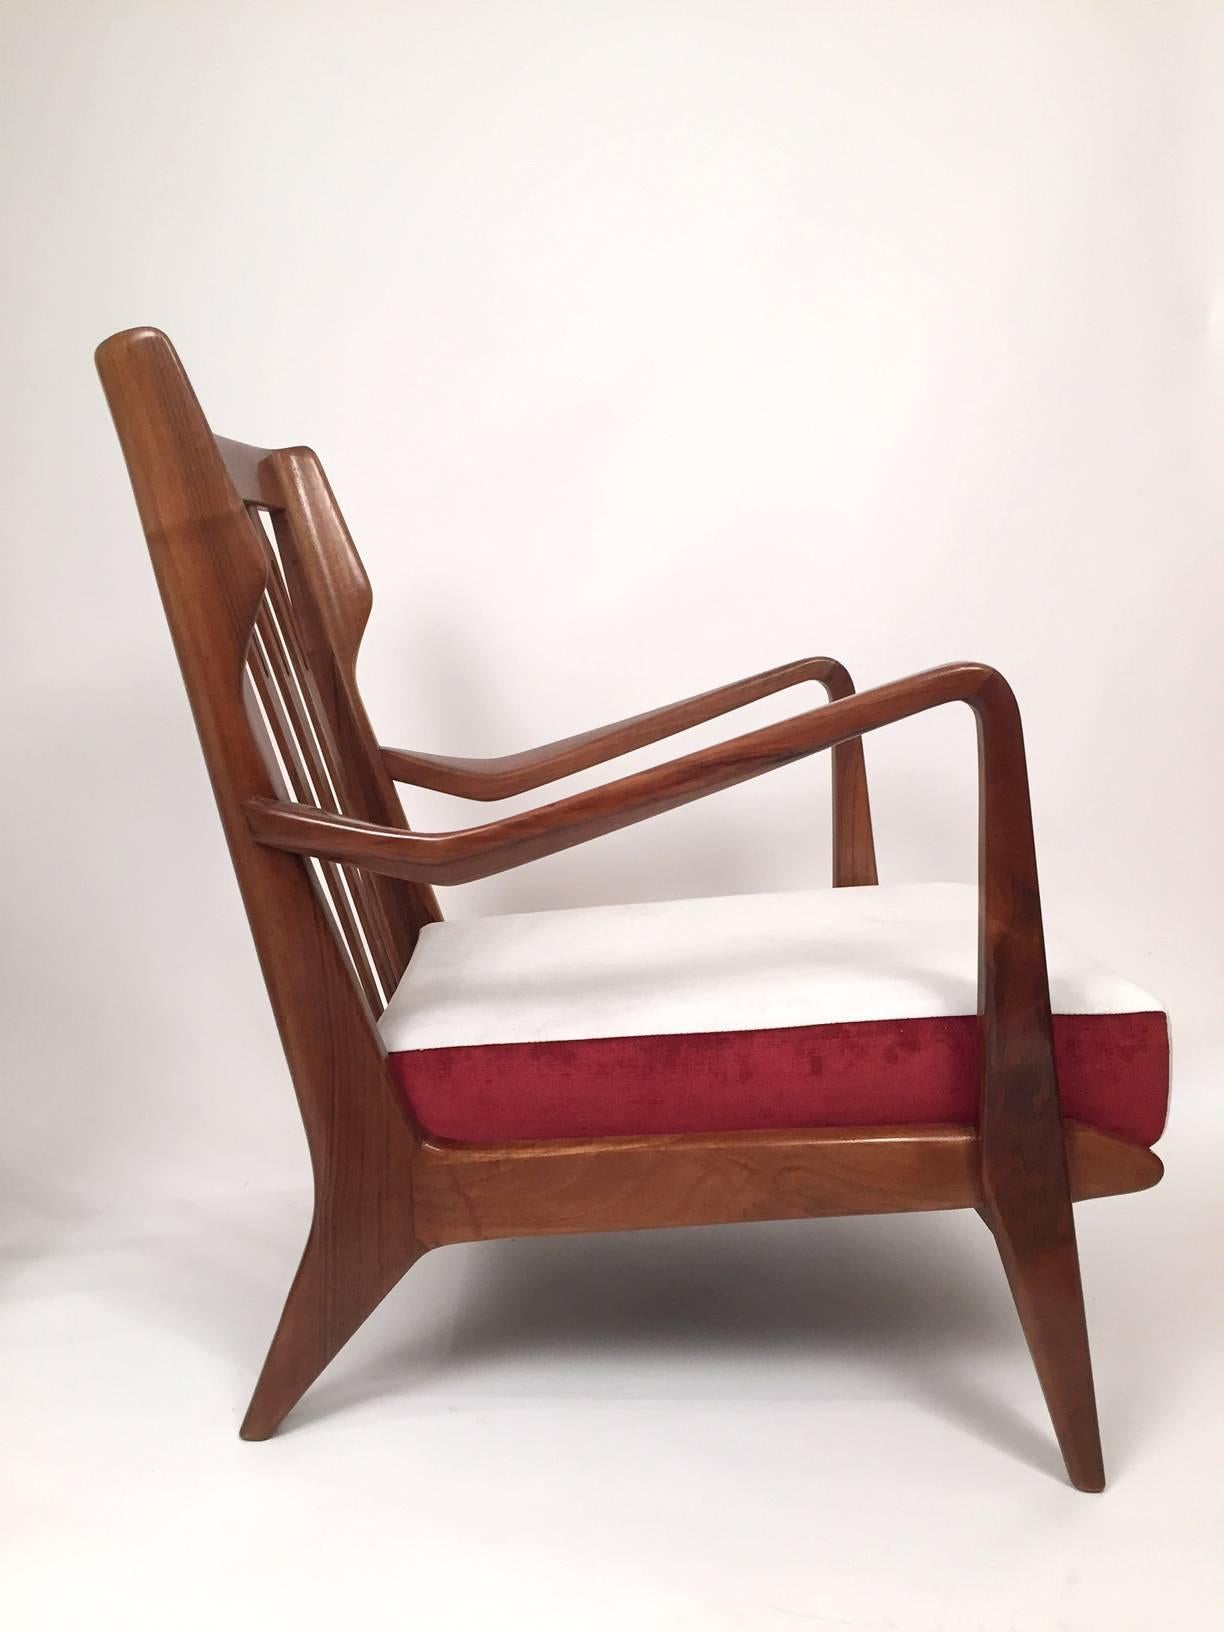 Fabric Pair of Gio Ponti Walnut Chairs Model No 516 for Cassina, 1950s